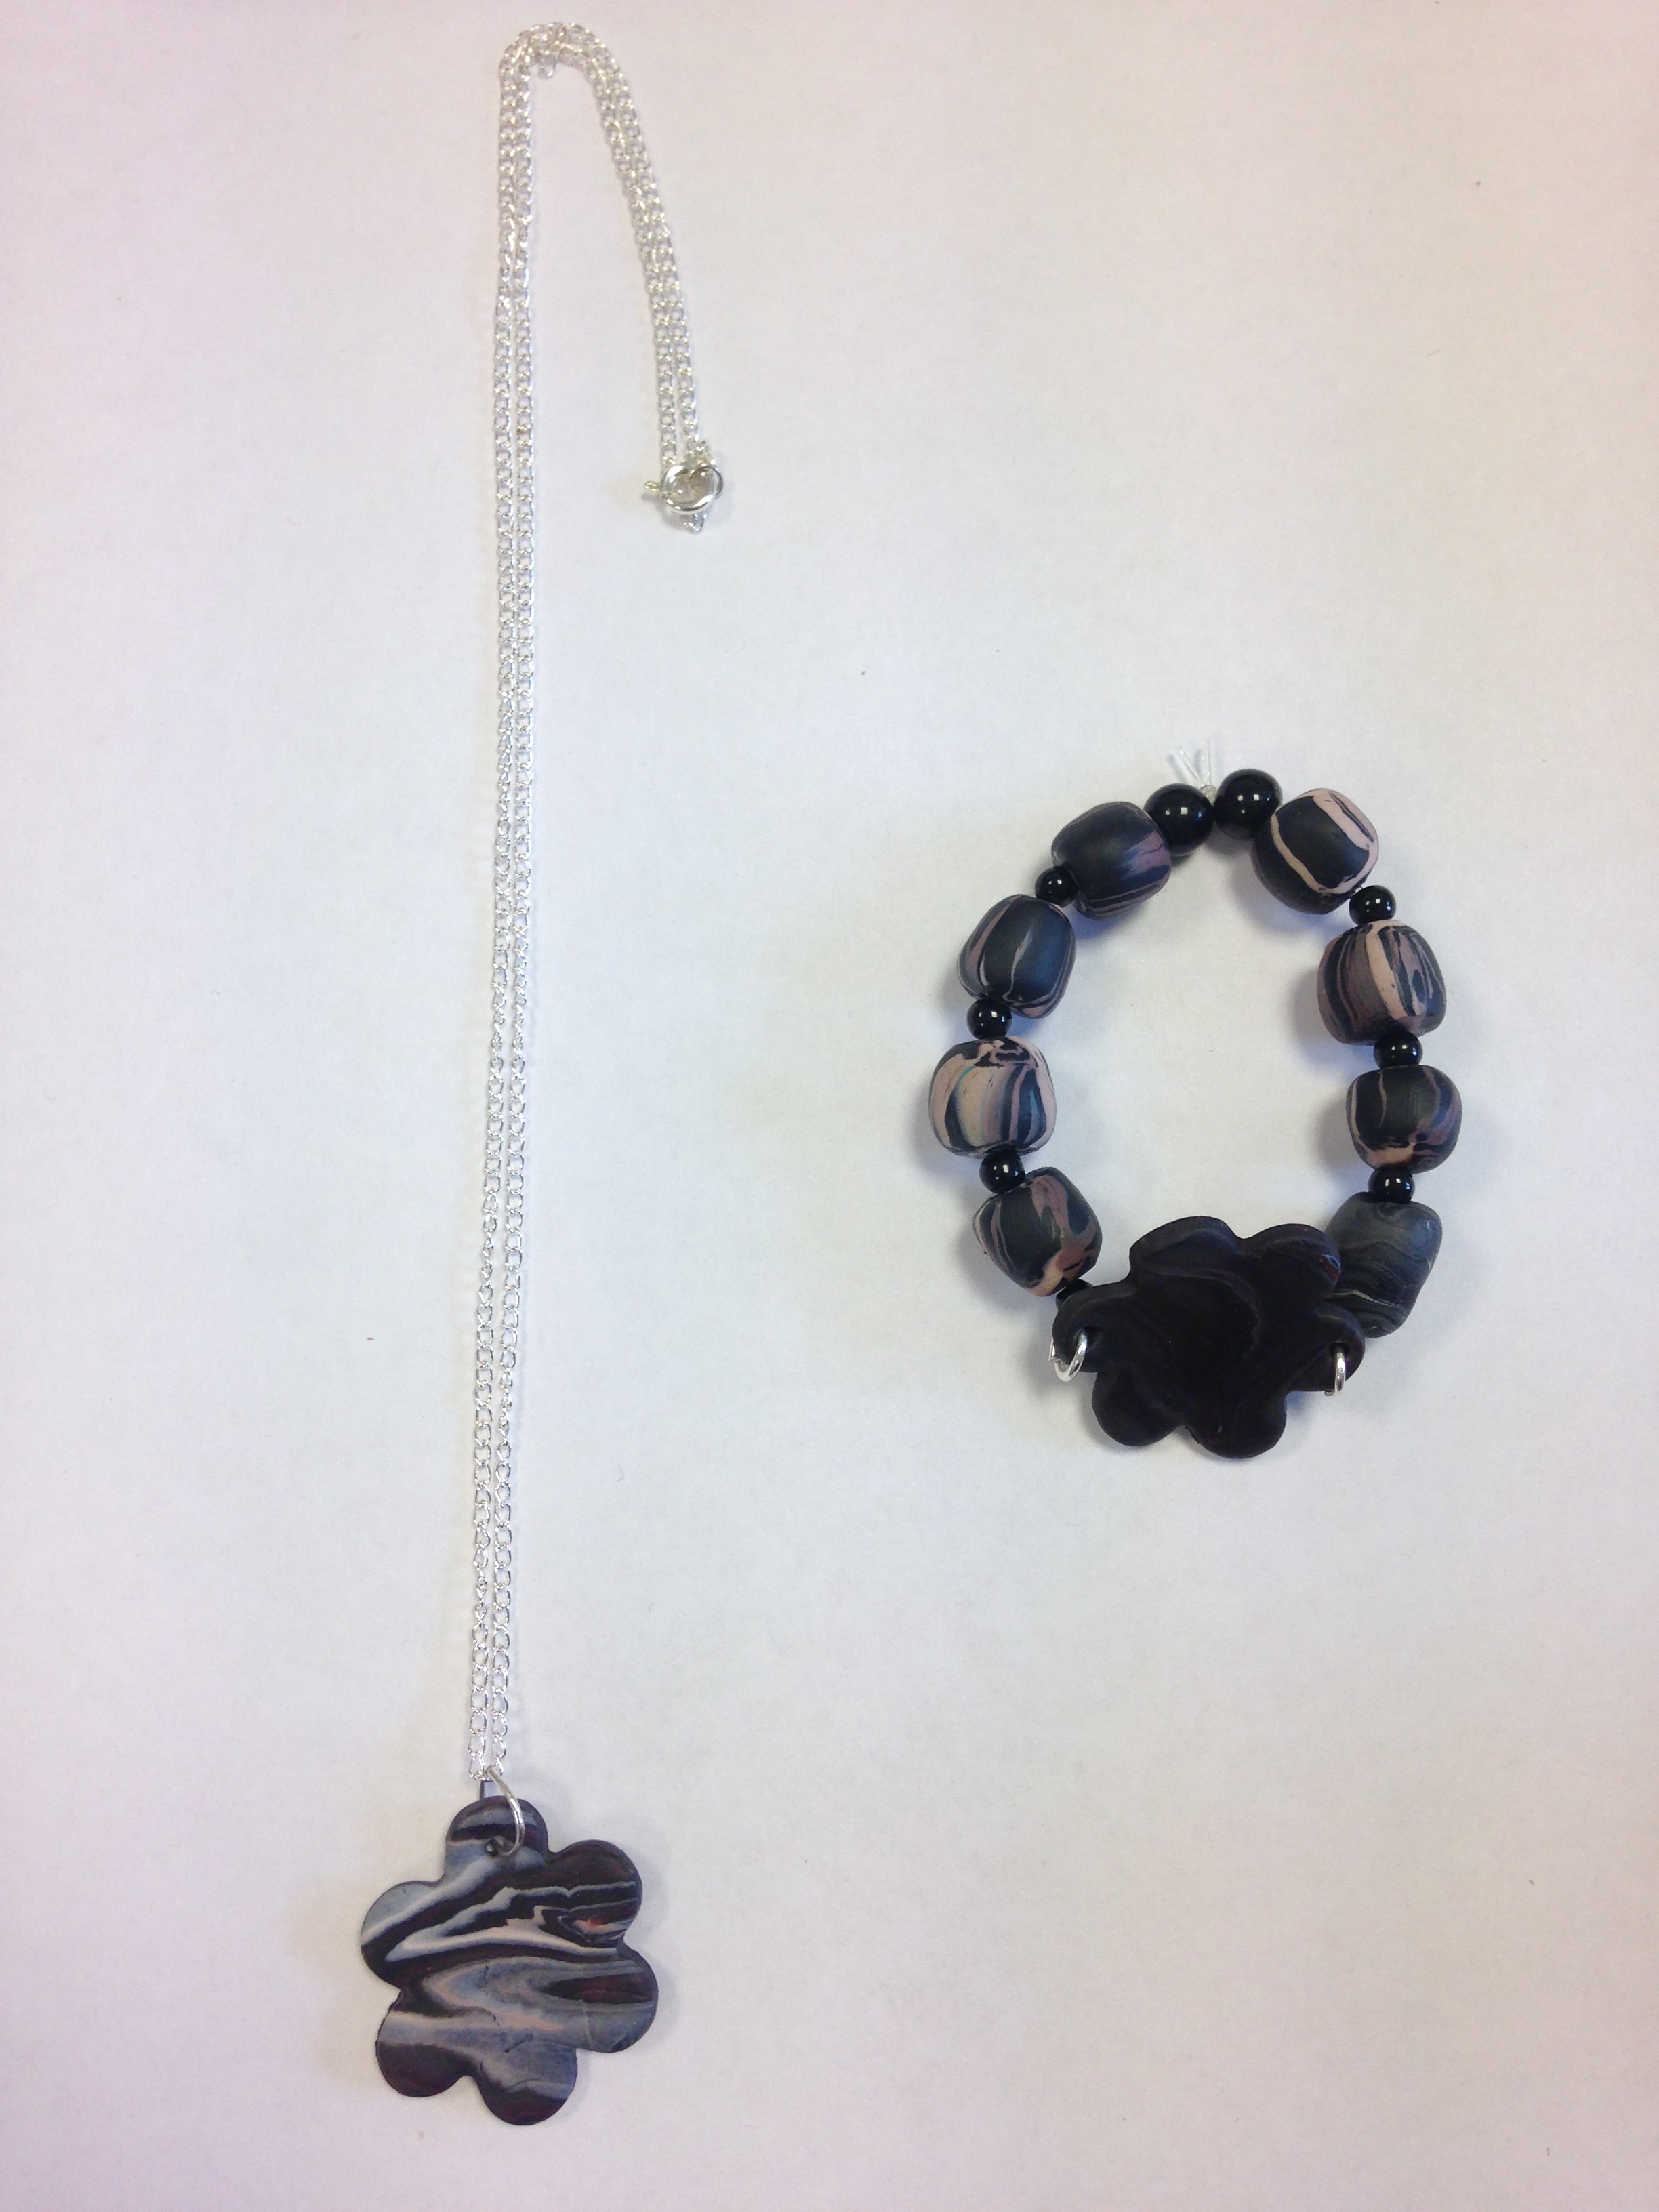 necklace and bracelet with a black flower